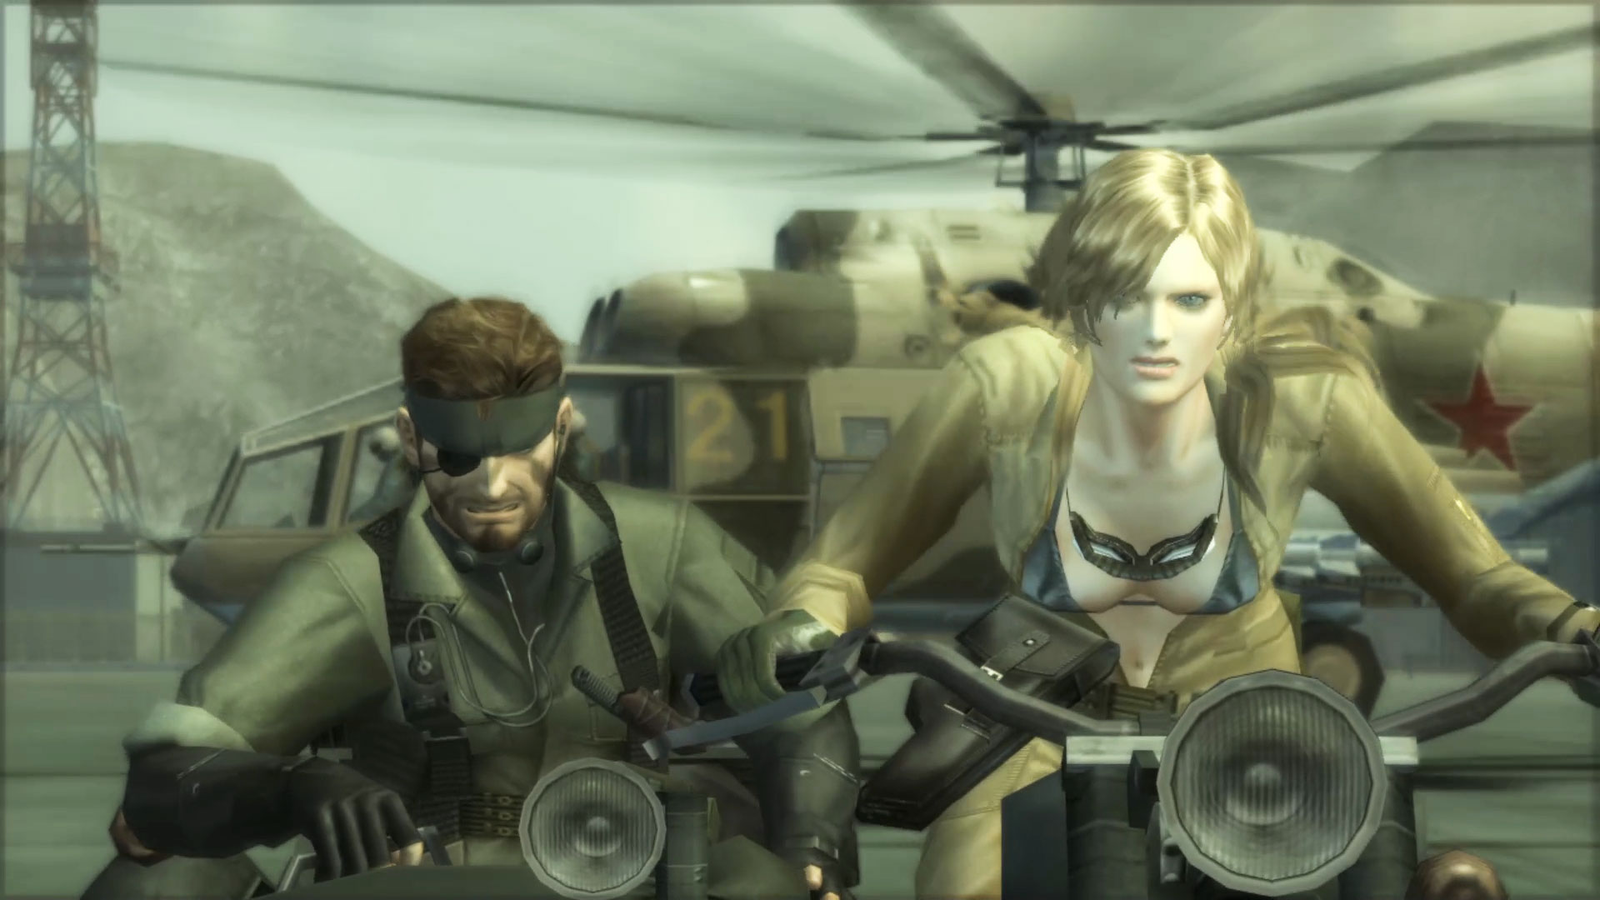 Future Metal Gear Solid remakes will be made 'if fans want them', Konami  confirms